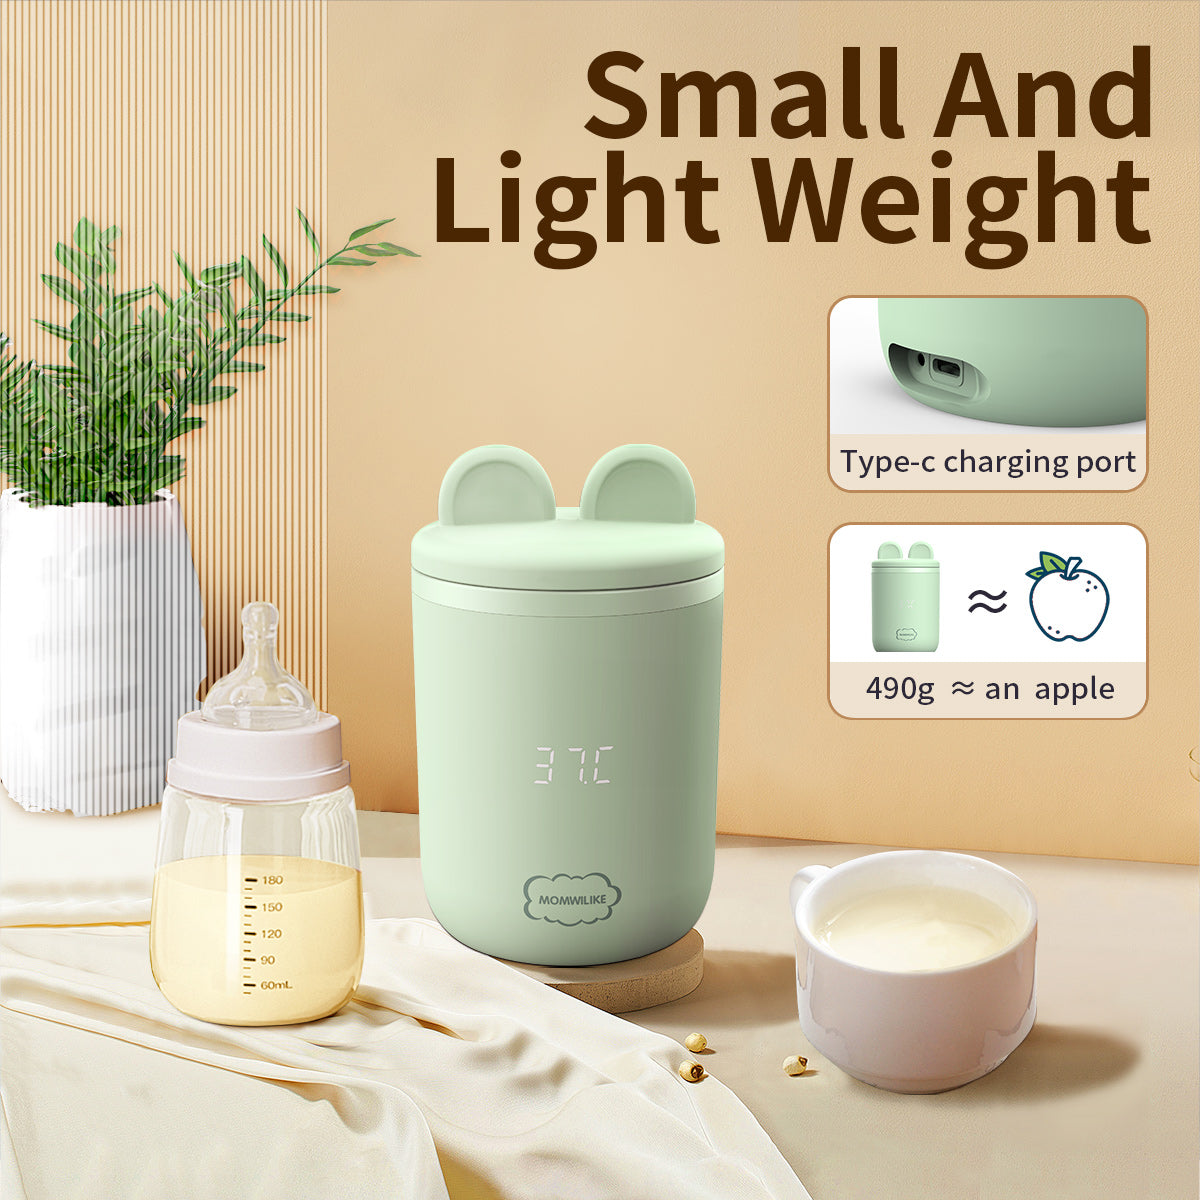 Momwilike Smart Portable Bottle Warmer brings convenience and warmth to your feeding routine, connecting you to efficiency and comfort.